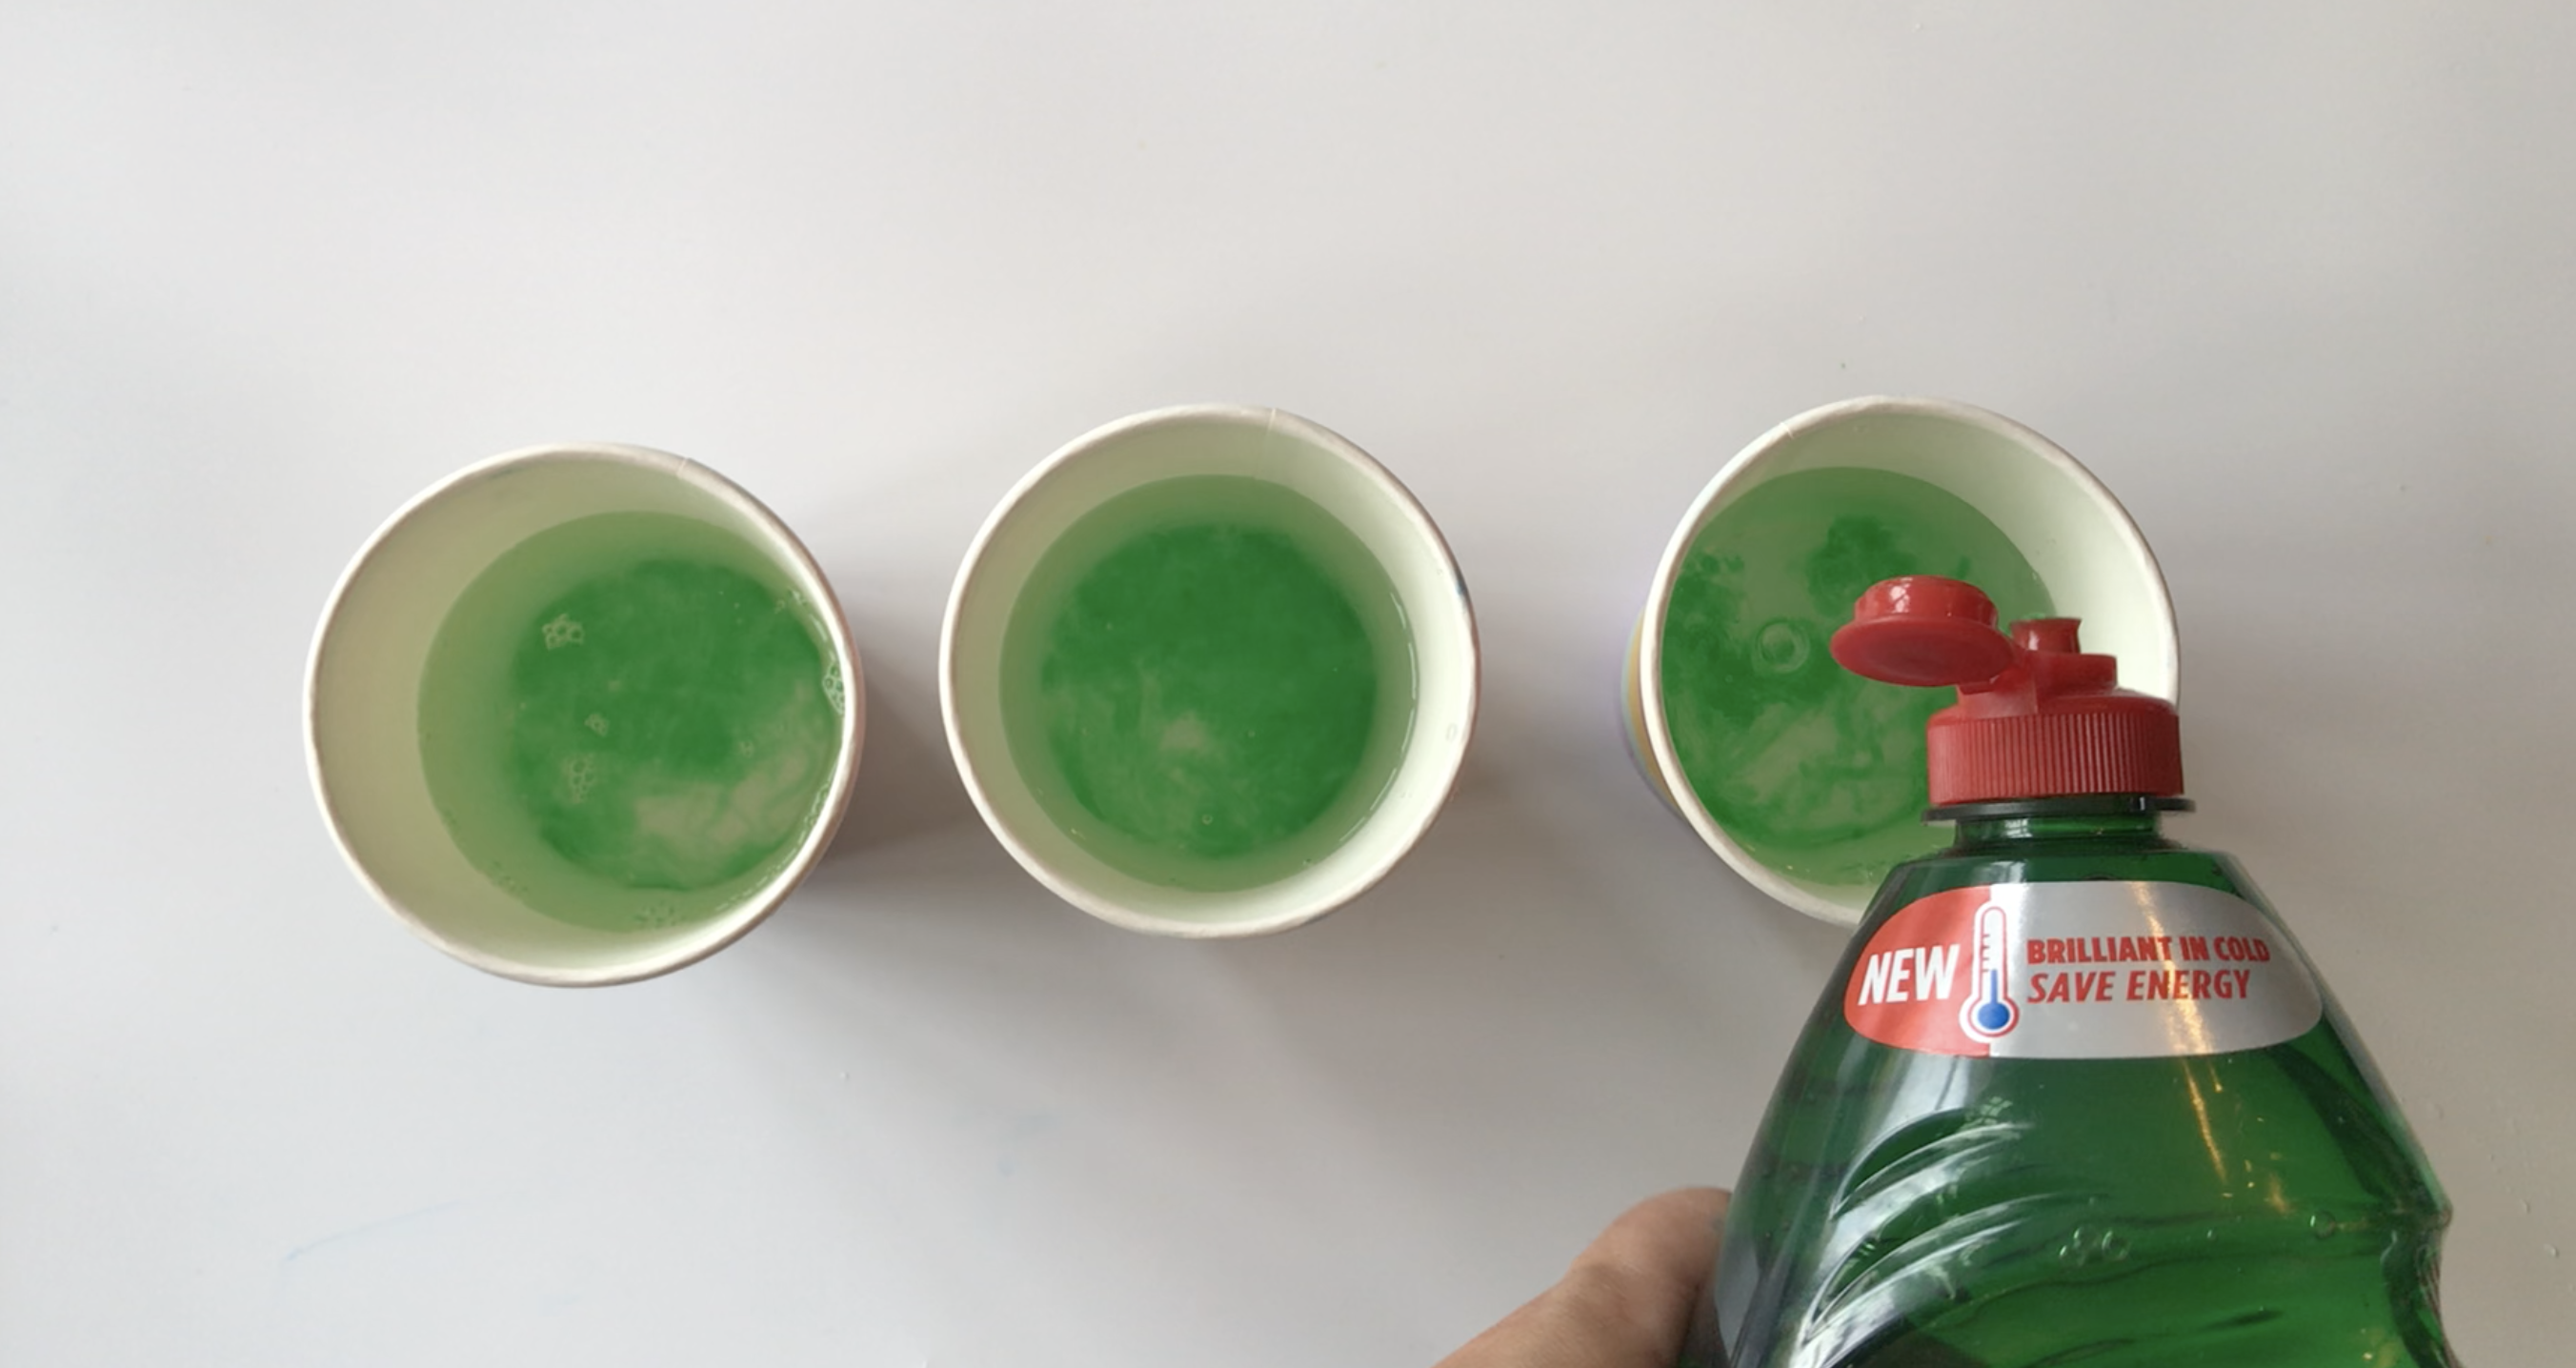 Squirt some washing up liquid into each cup